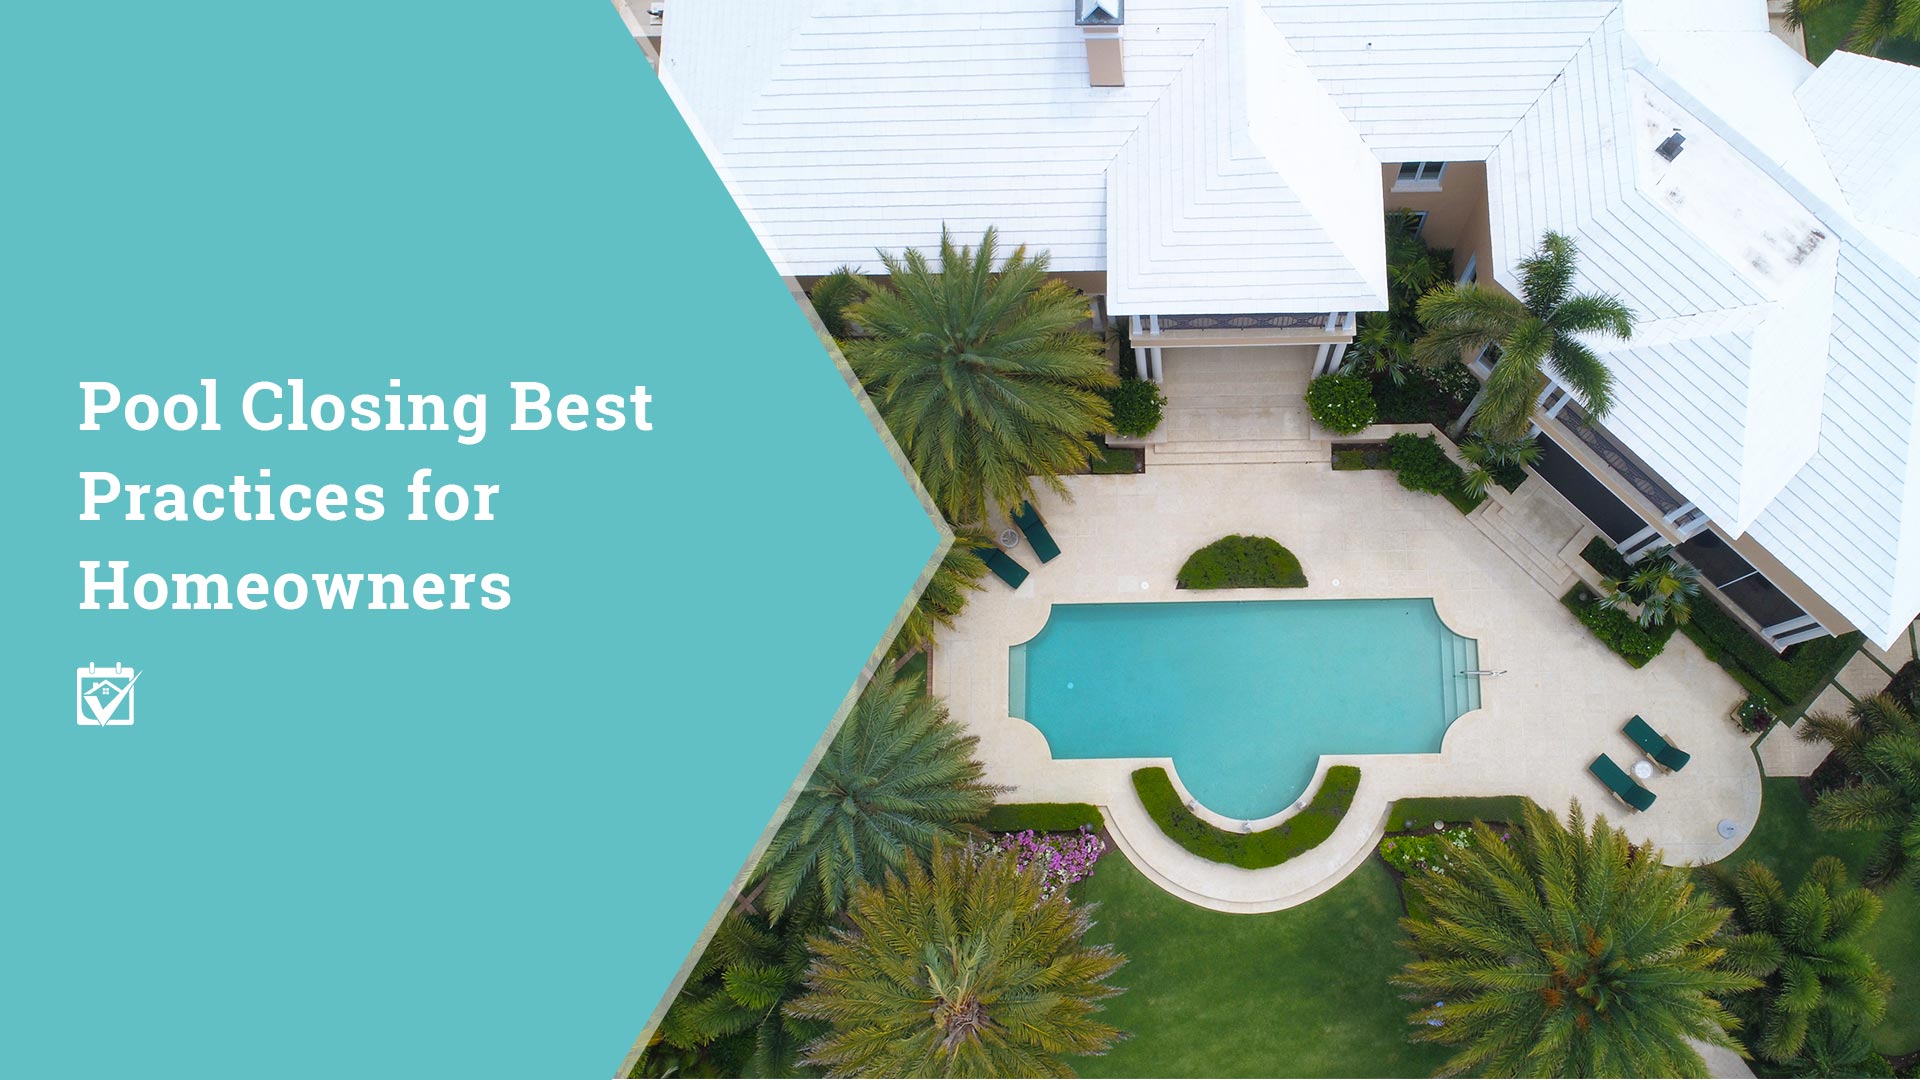 Pool Closing Best Practices for Homeowners 